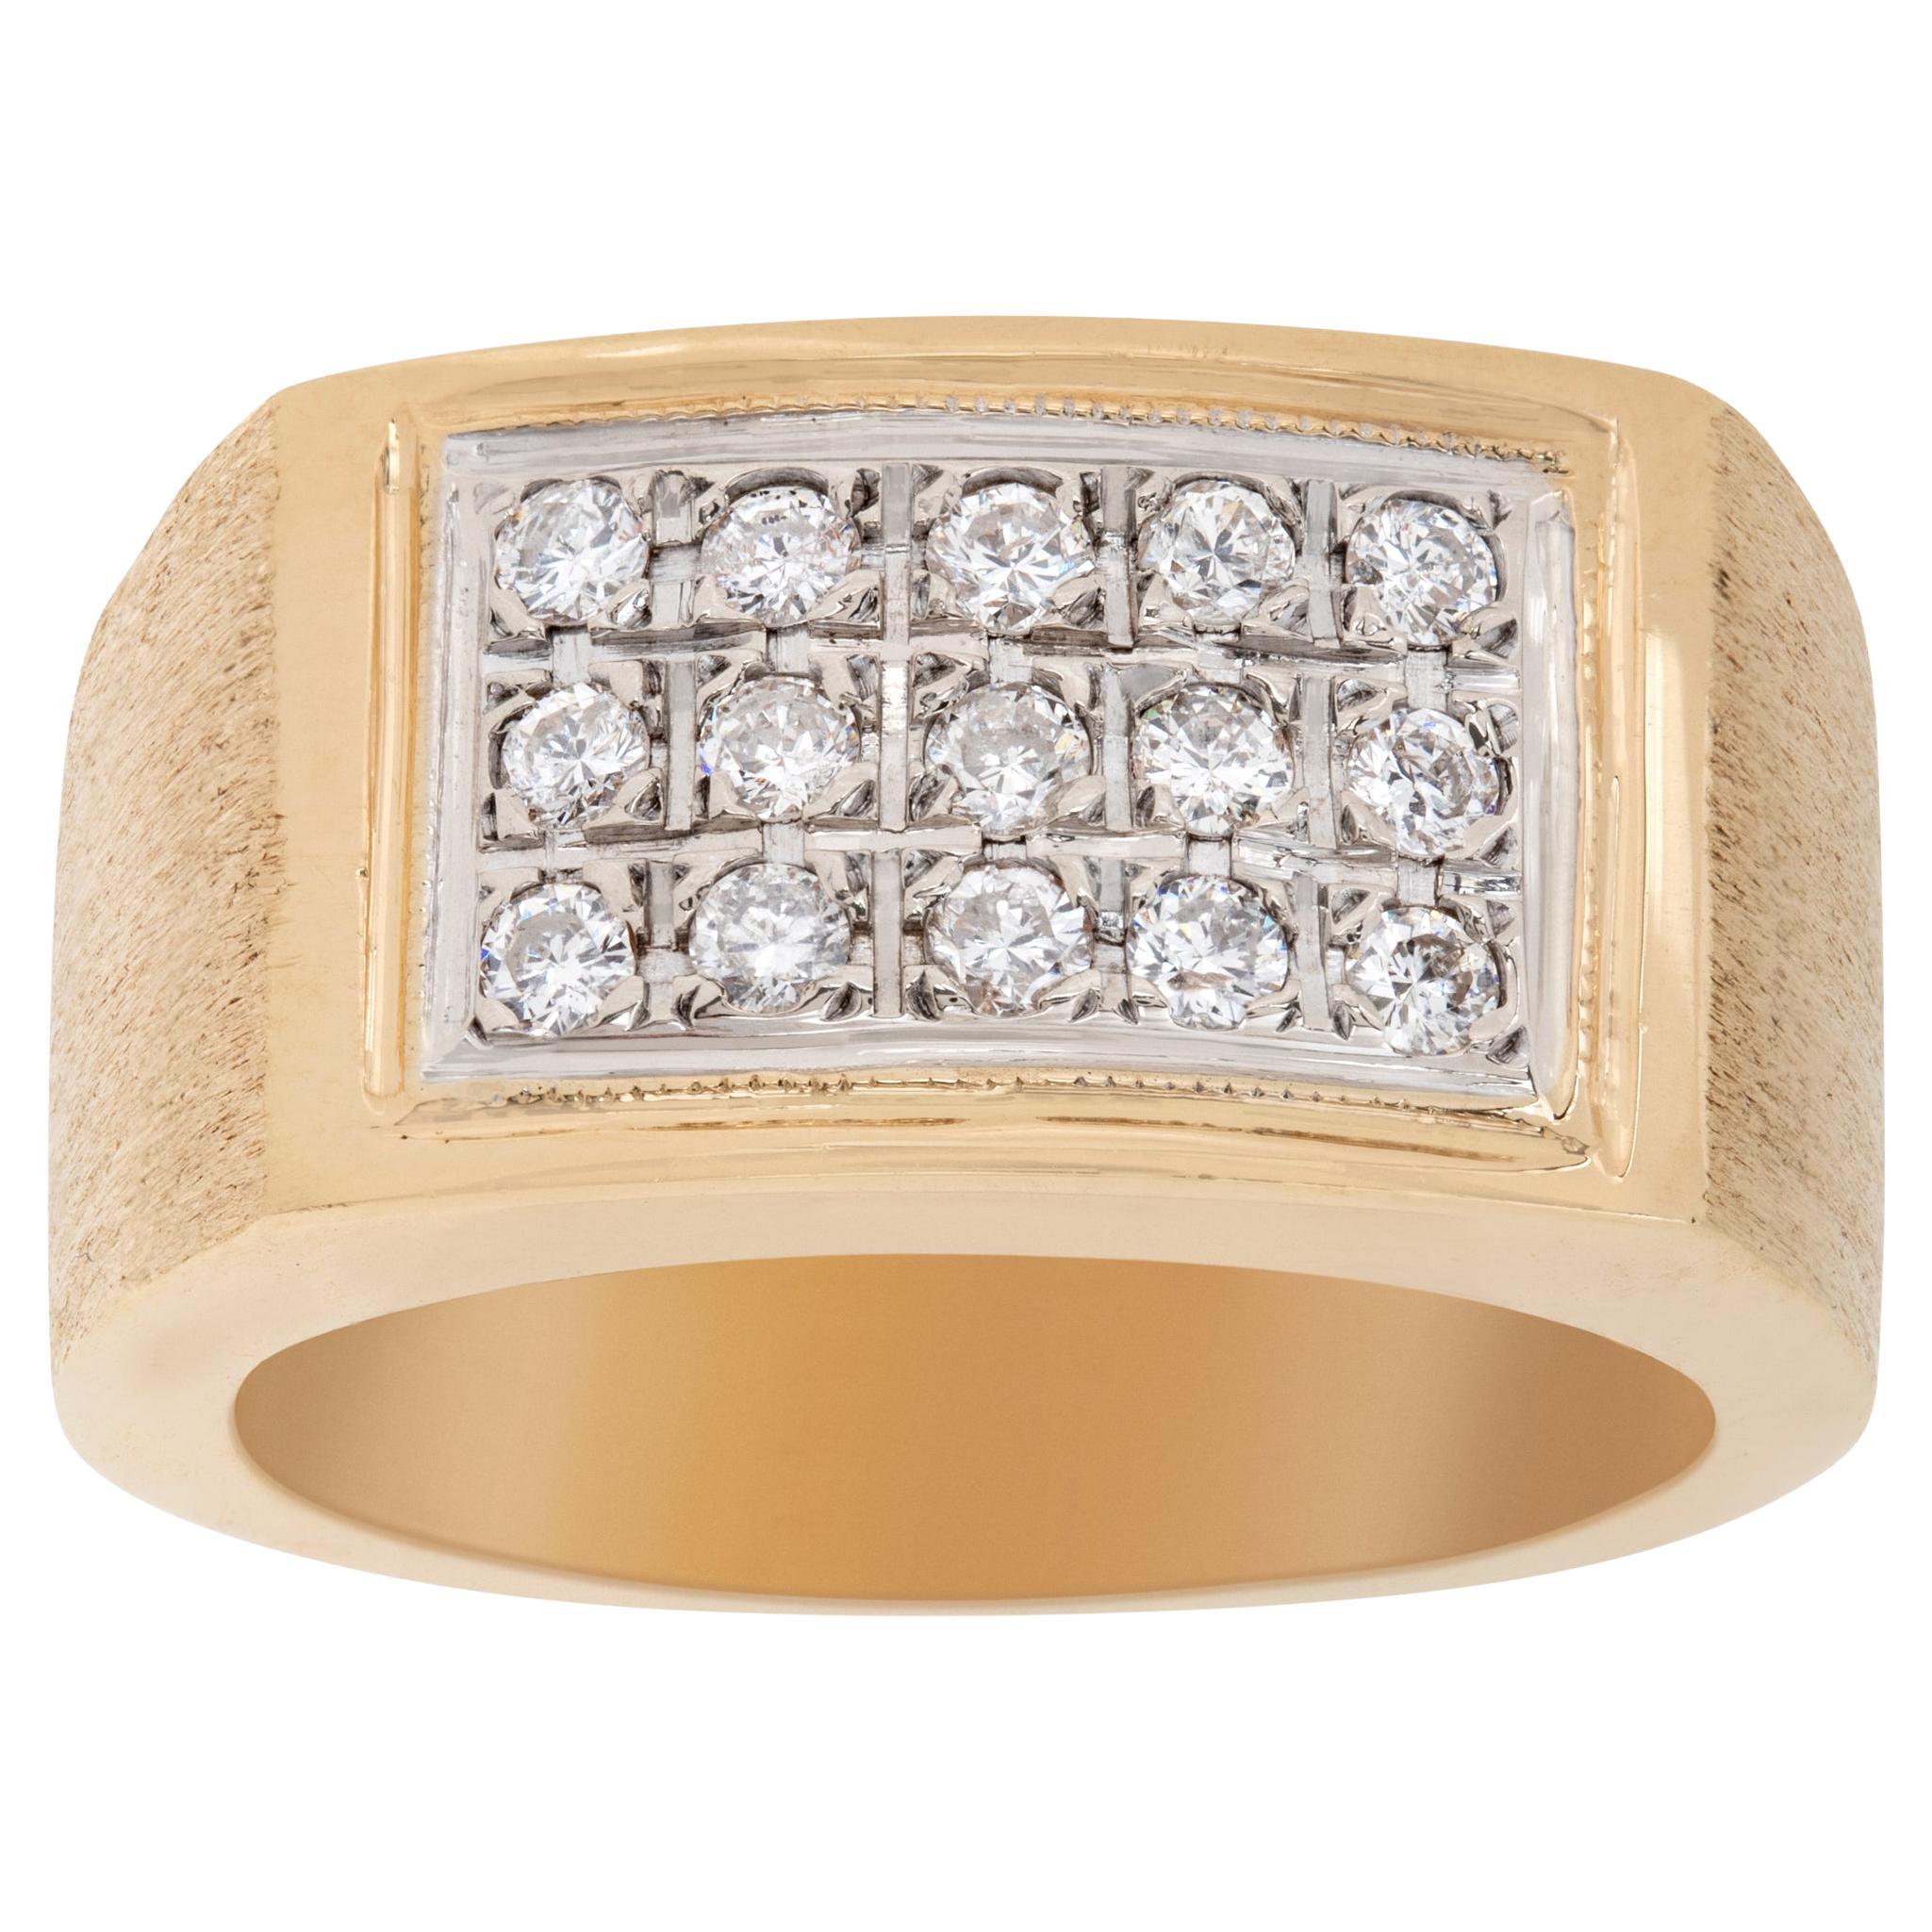 Gents Solid Diamond Ring in 14k Yellow Gold, 0.70 Carats in Diamonds